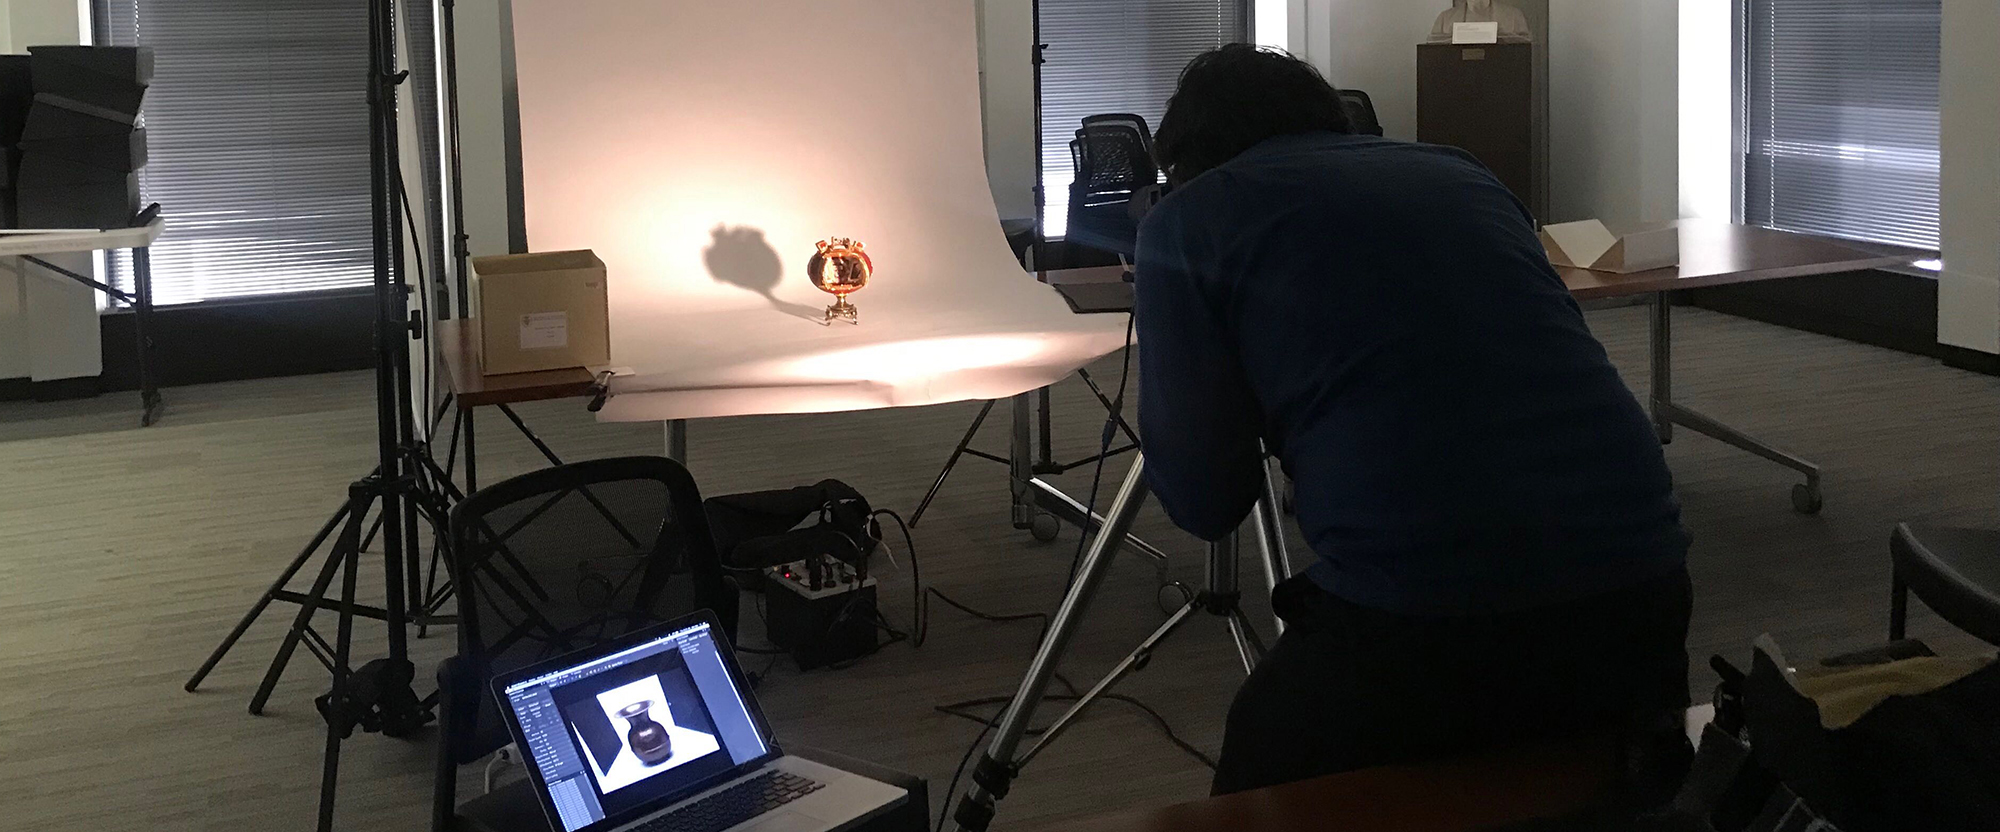 Photographer Nathan Keay photographing a decorated egg from the Special Collections Research Center